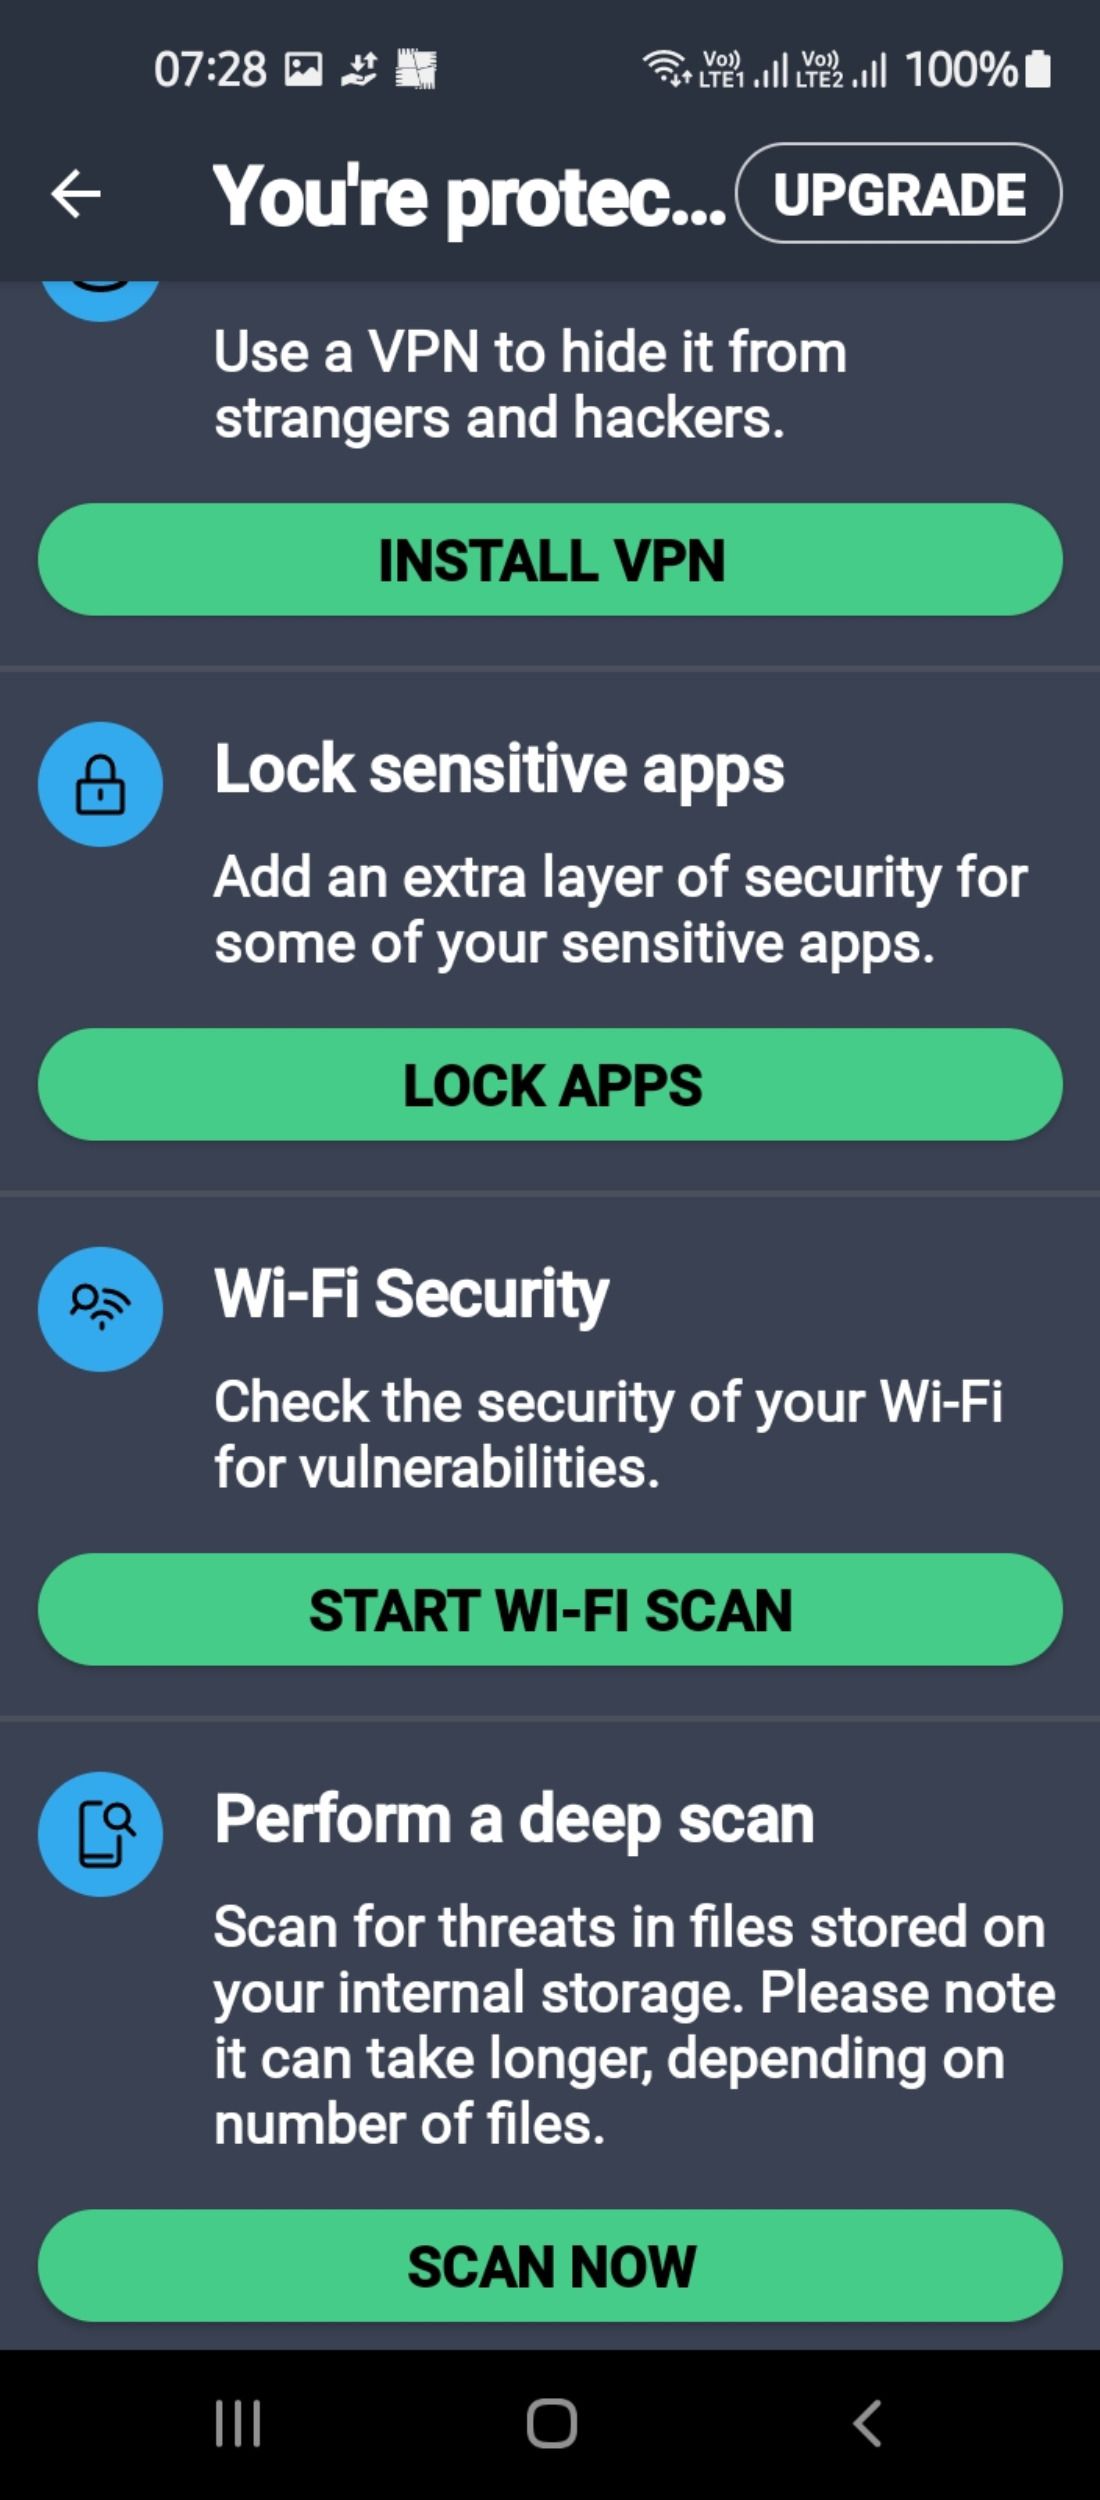 Antivirus scanning features for mobile security